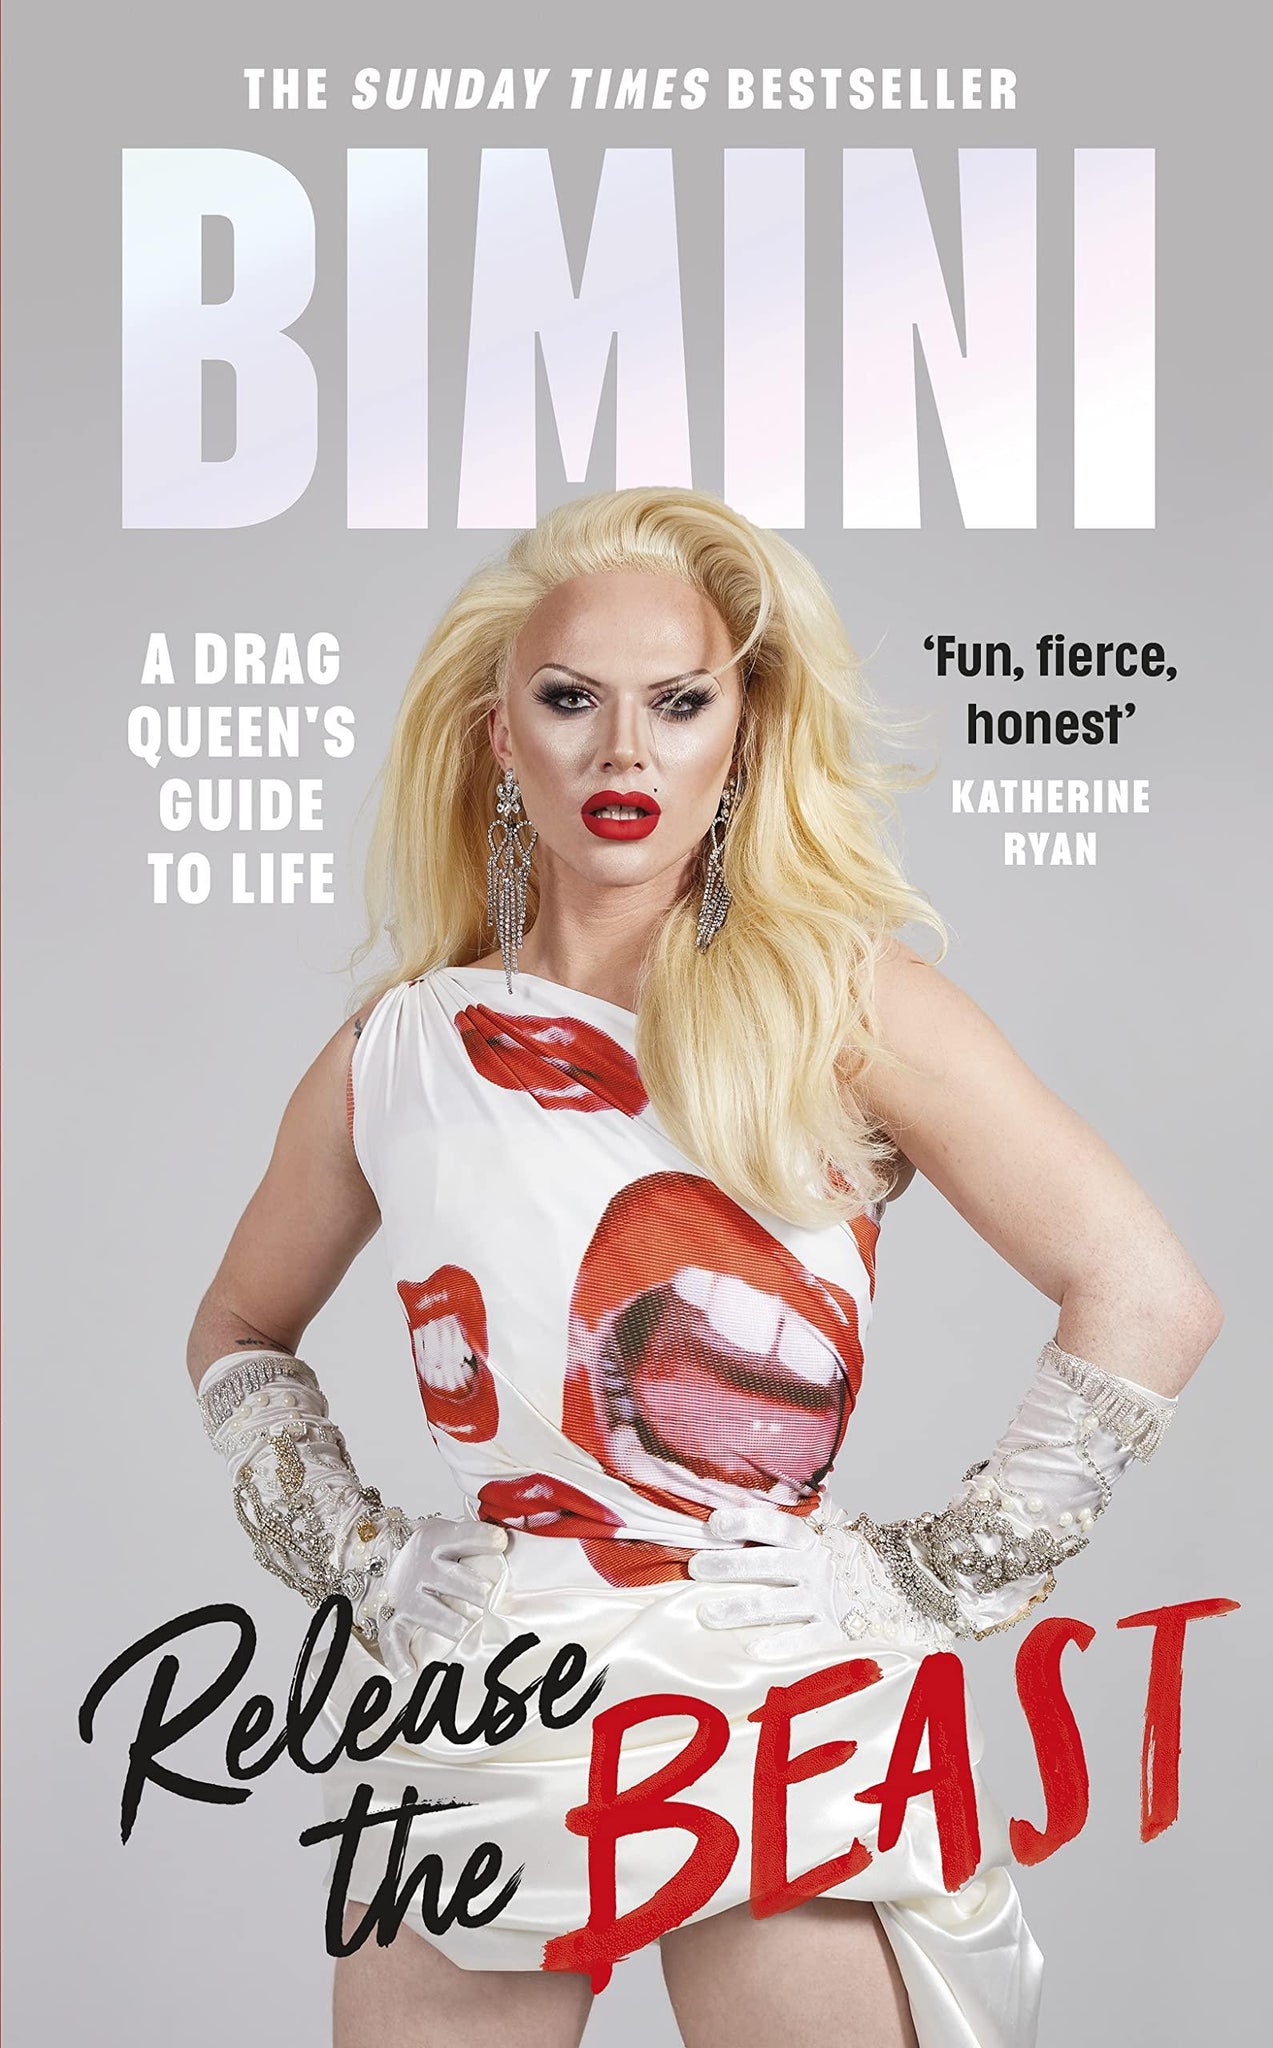 Release the Beast: A Drag Queen's Guide to Life - ShopQueer.co